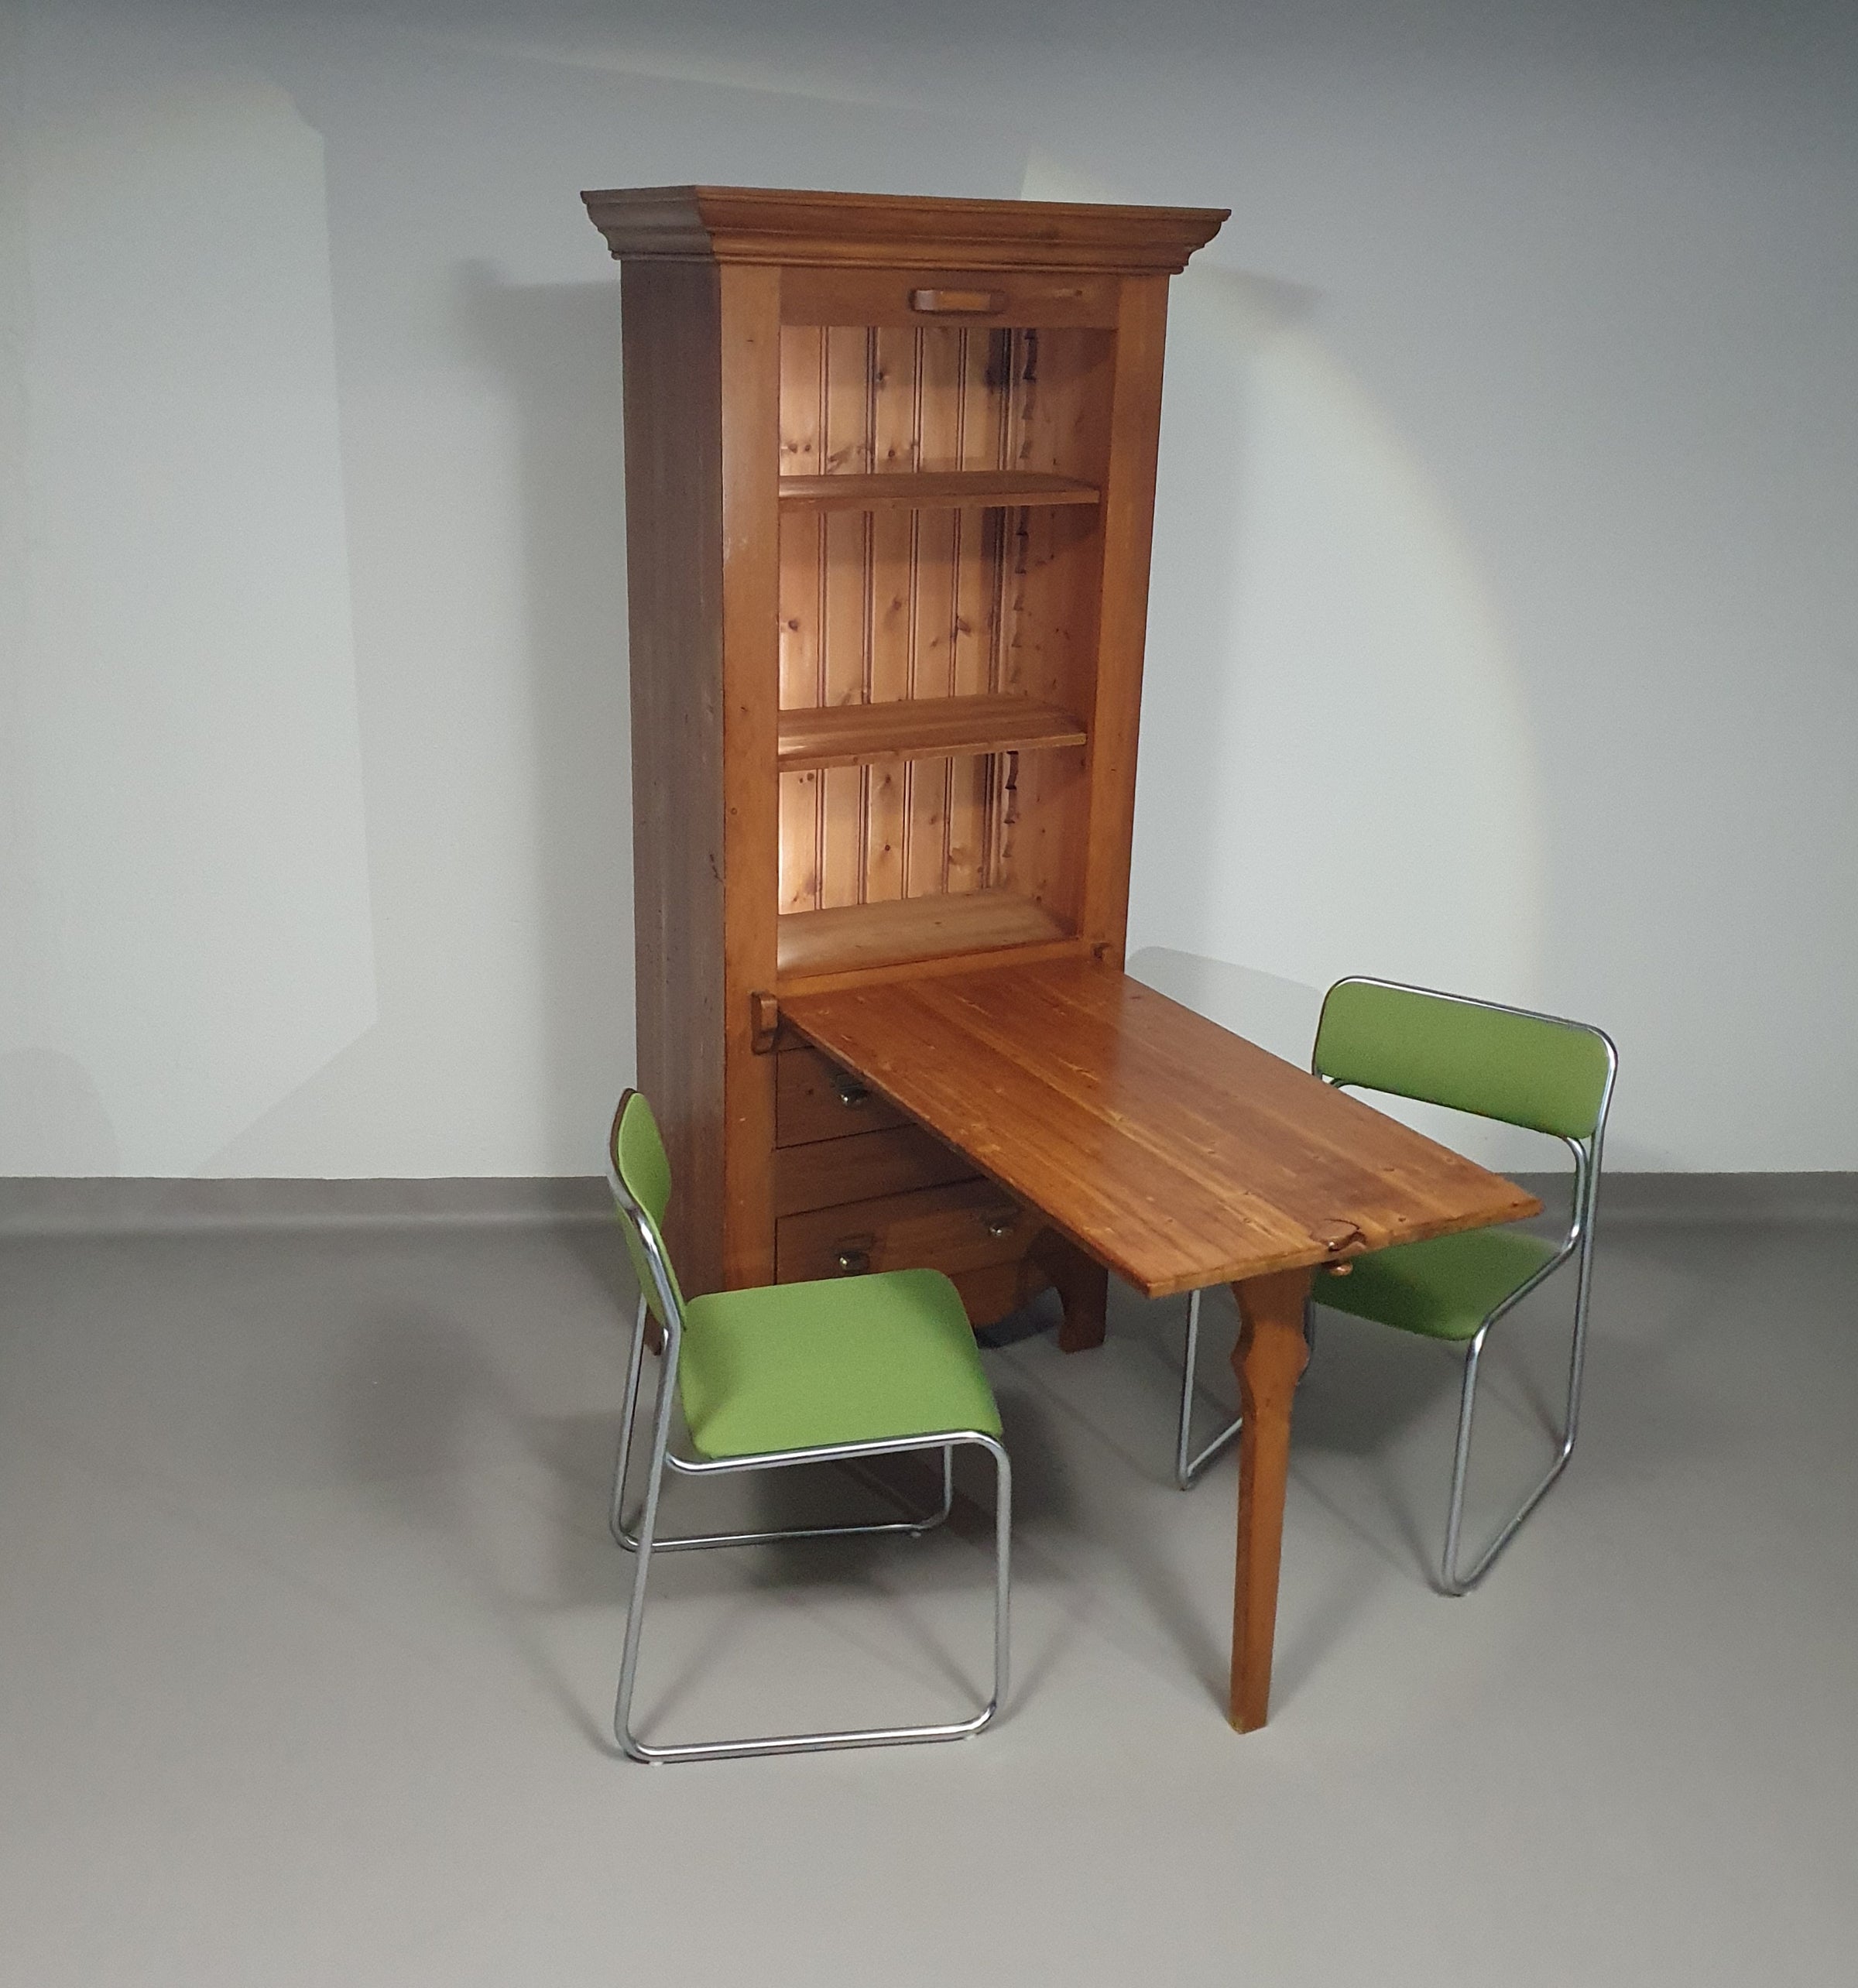 Cupboard / Cabinet / with fold down / folding / collaptible / table
Width 87
Height 195
Depth 46
Table 60 x 106 x height 76 cm